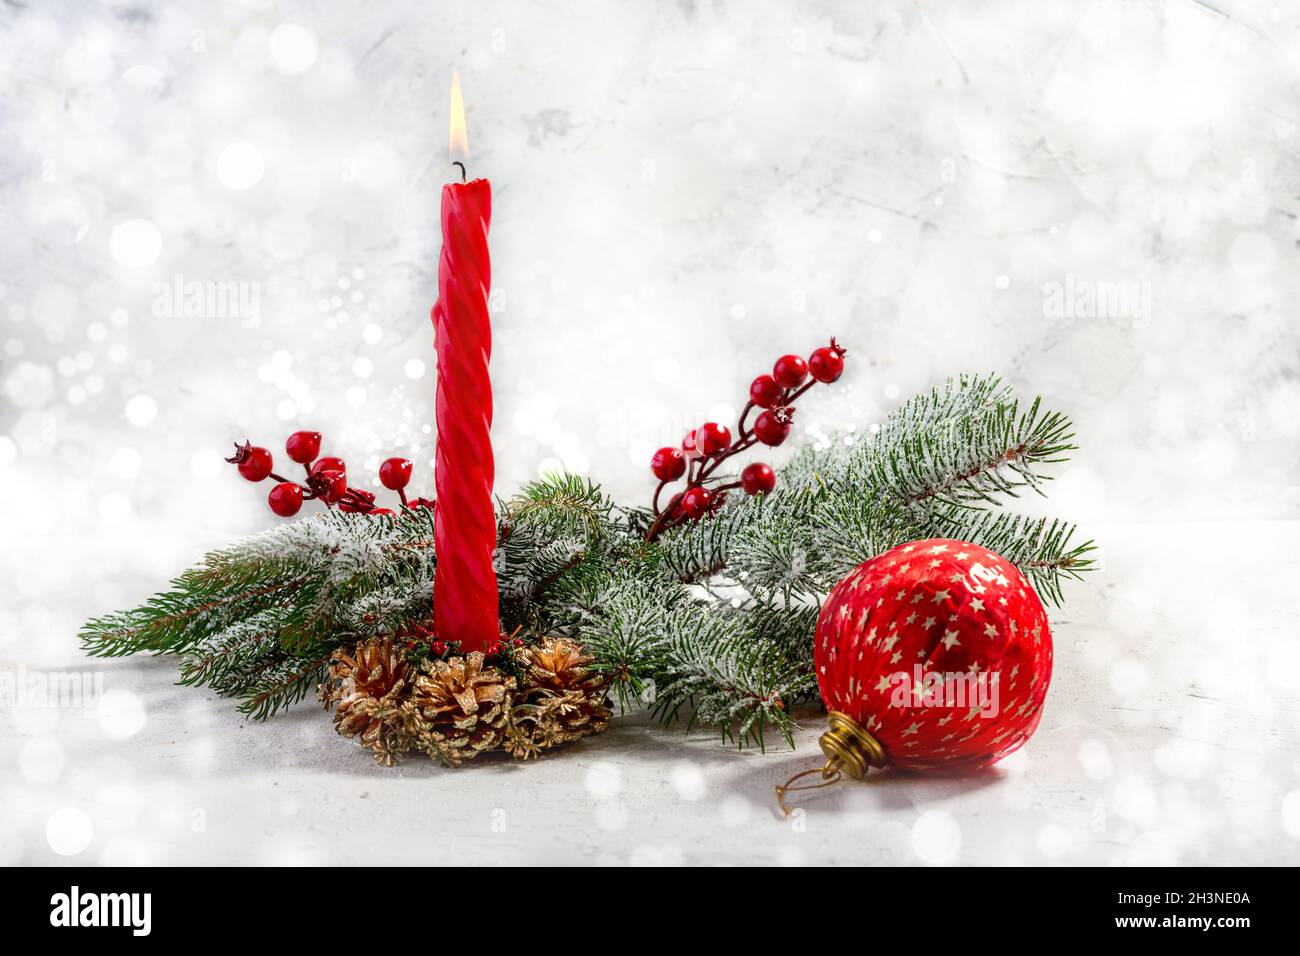 Burning red candle with snow fir branches. Christmas advent. Stock Photo